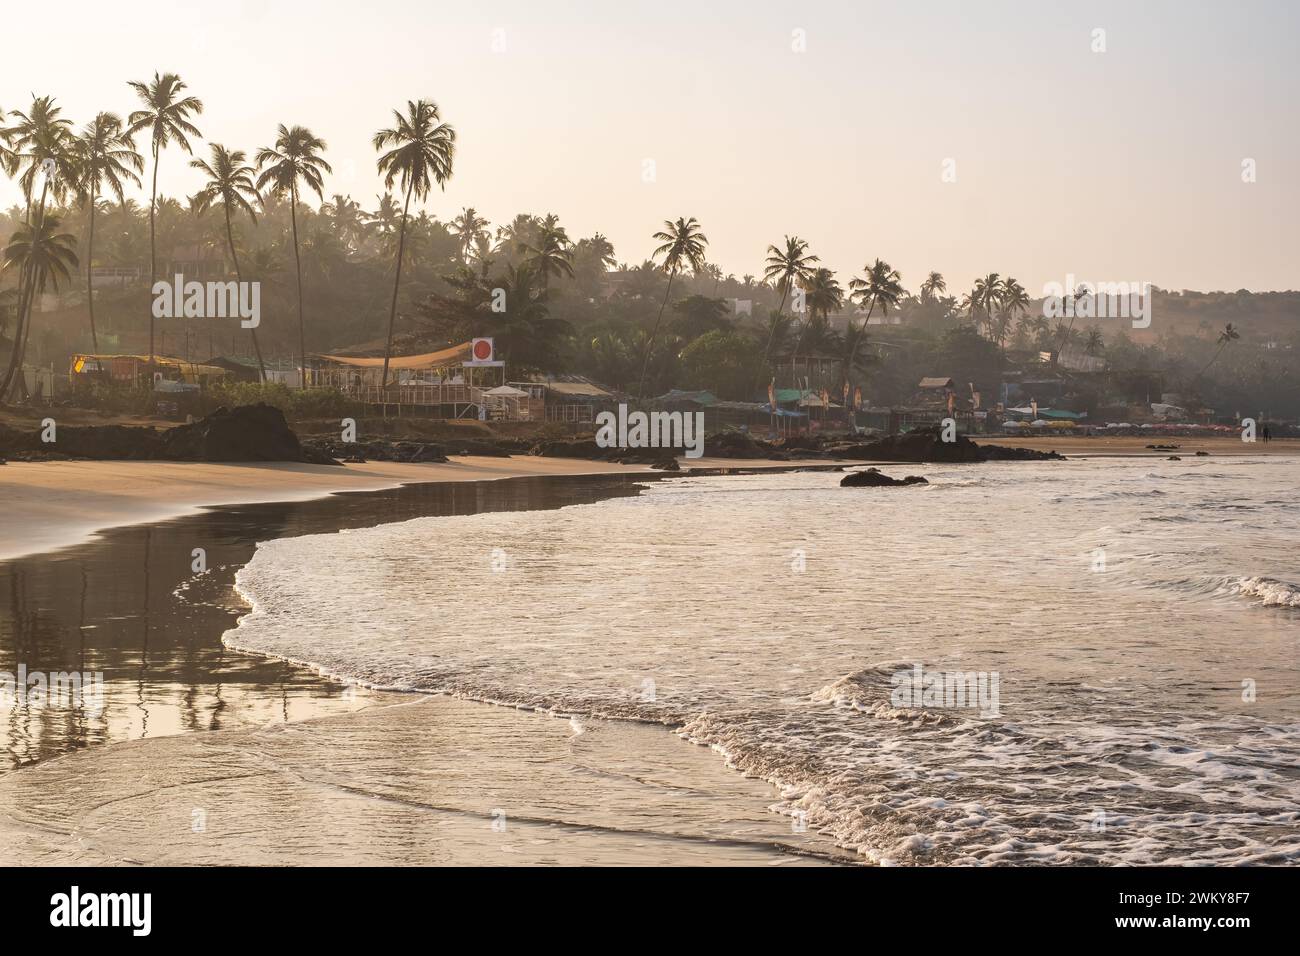 Vagator or Ozran beach aerial panoramic view in north Goa, India. Goa beach early morning before sunrise view of palm trees and restaurants on the bea Stock Photo